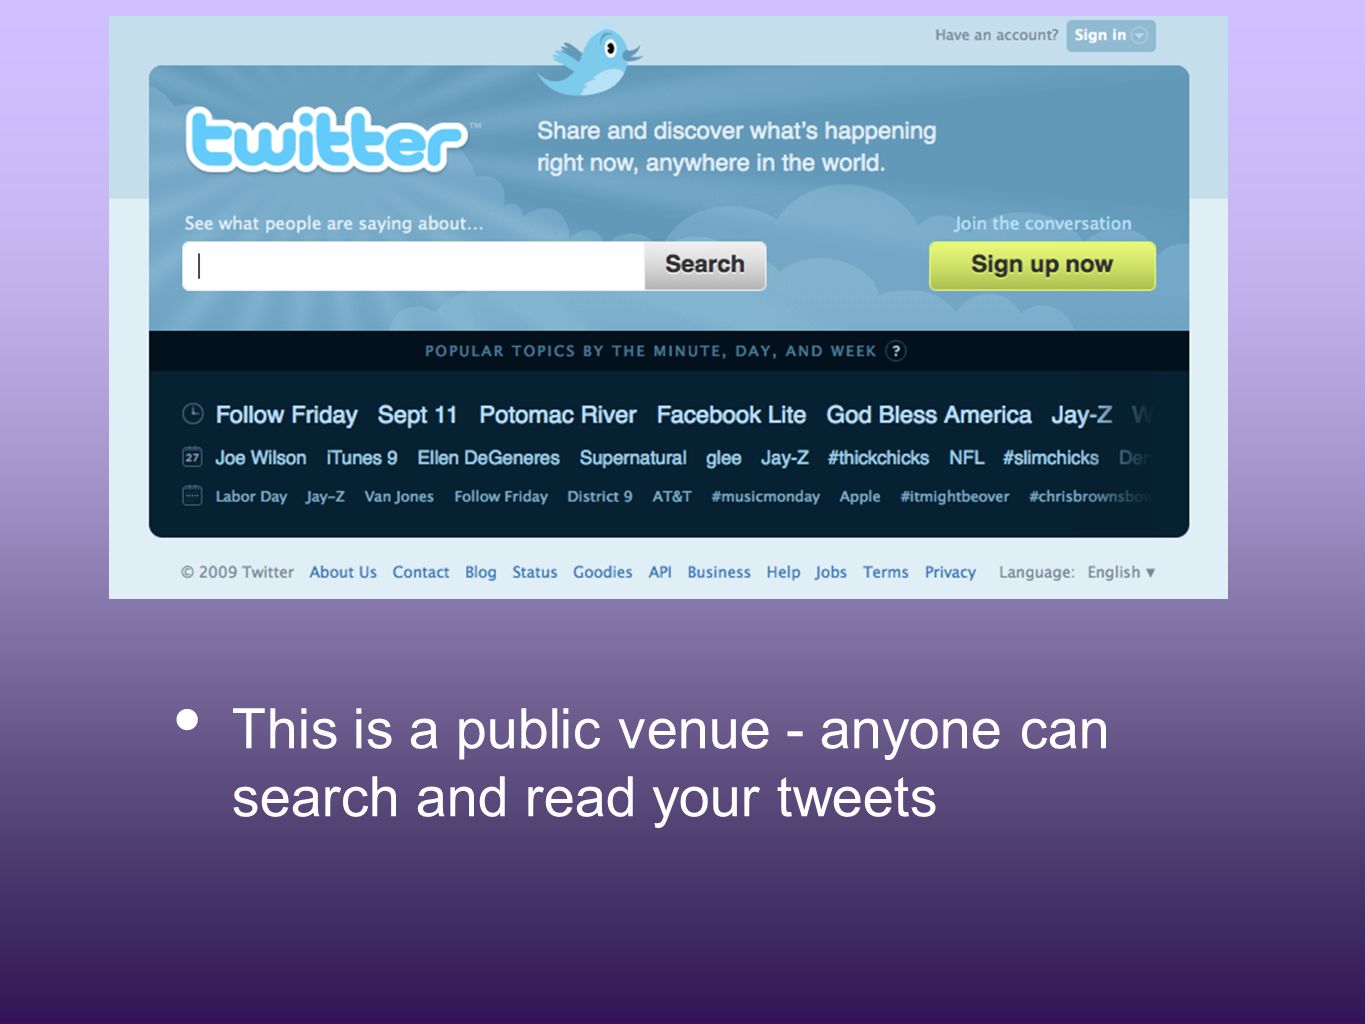 This is a public venue - anyone can search and read your tweets